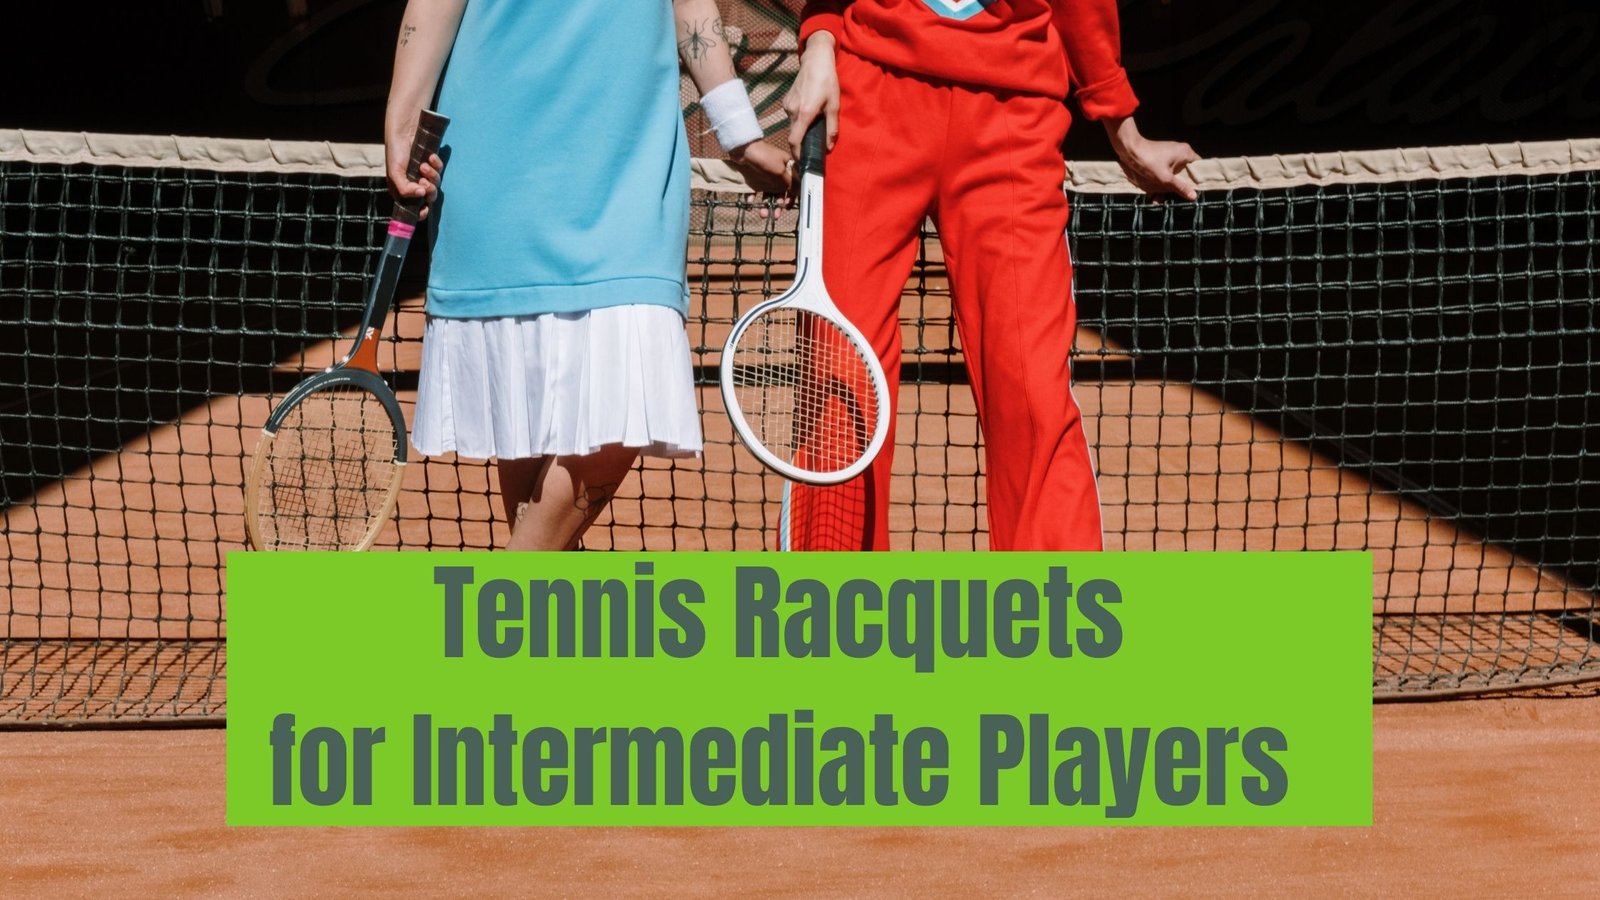 Tennis Racquets for Intermediate Players